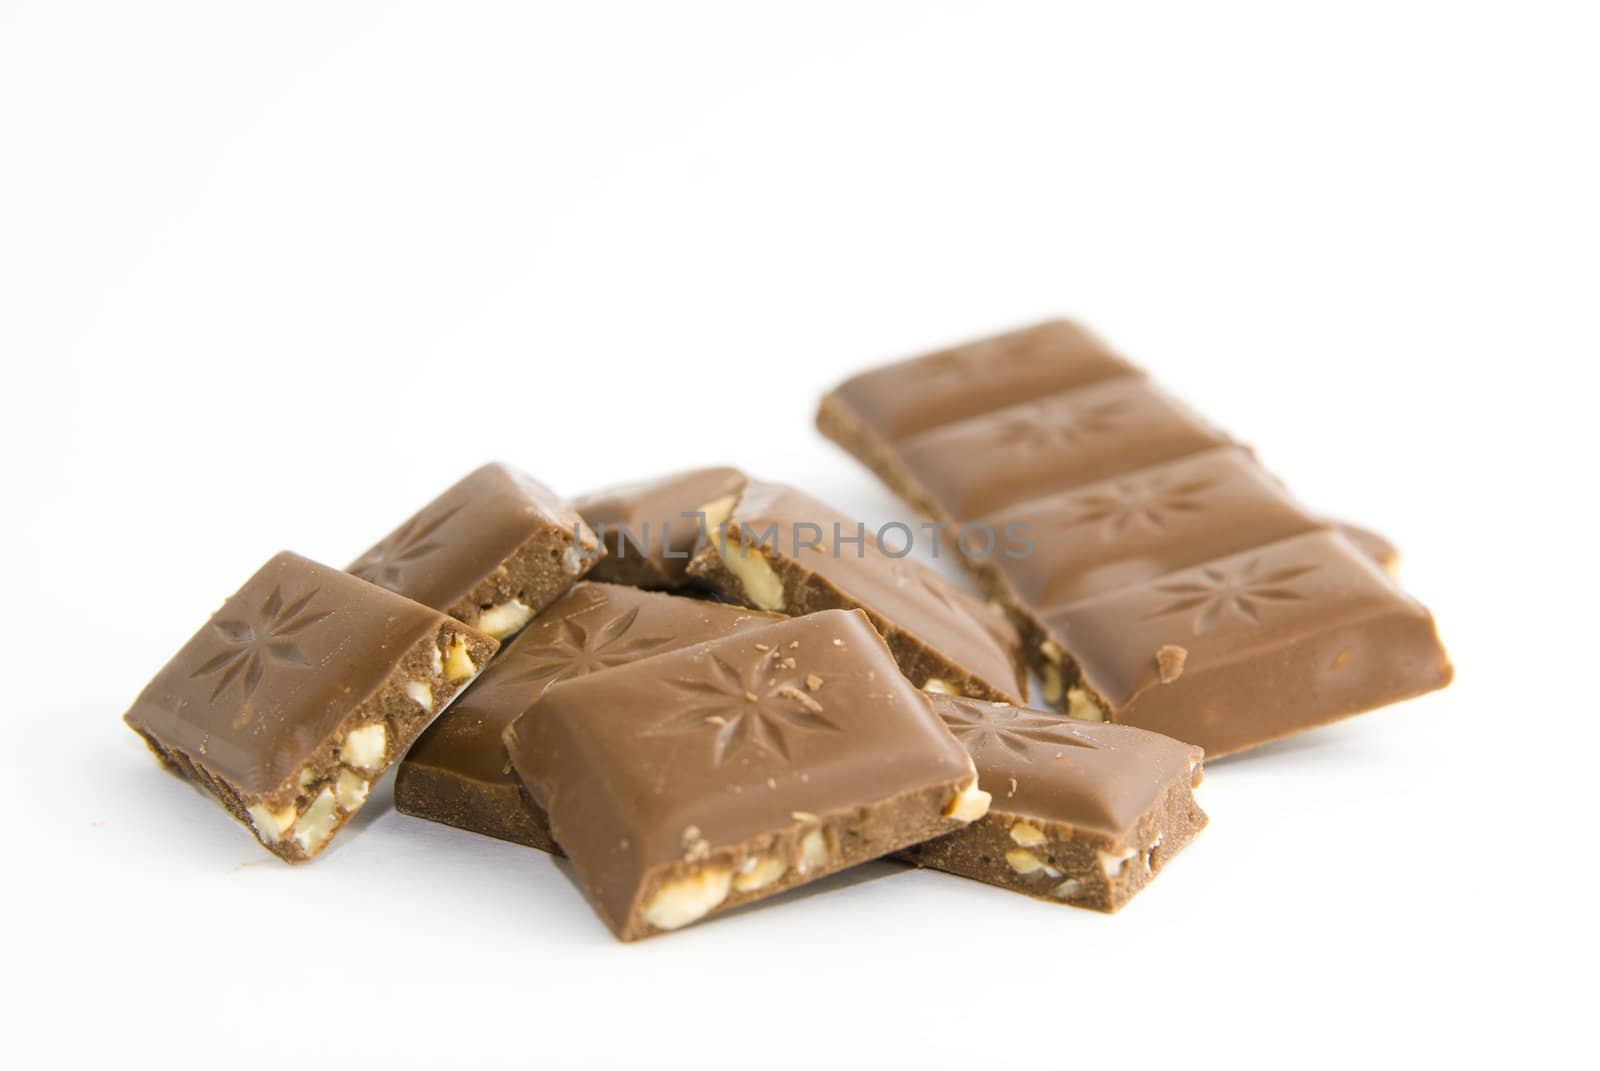 Milk chocolate with nuts on white background